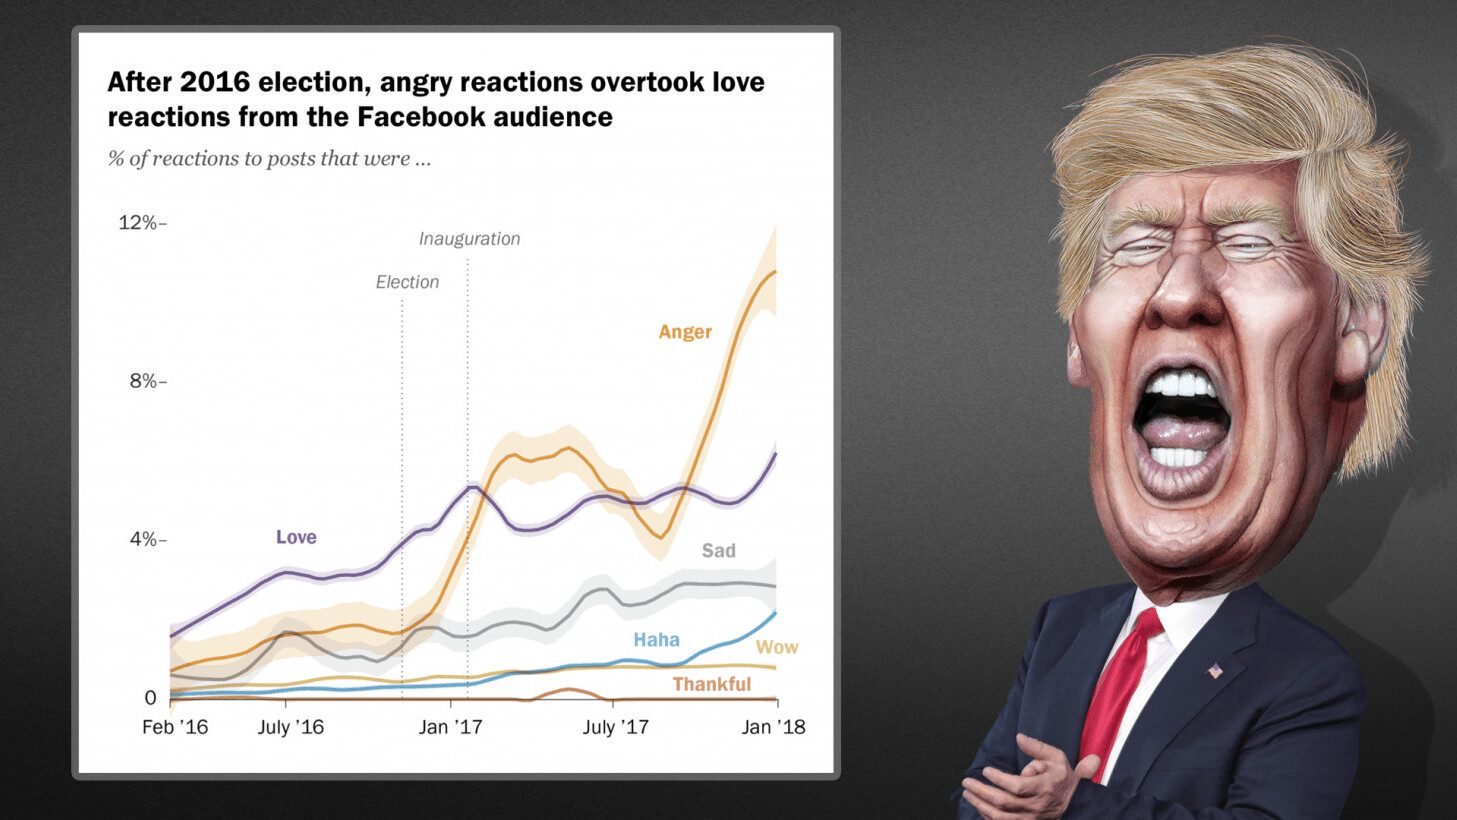 Trump inauguration kicked off the ‘angriest’ period in Facebook’s history